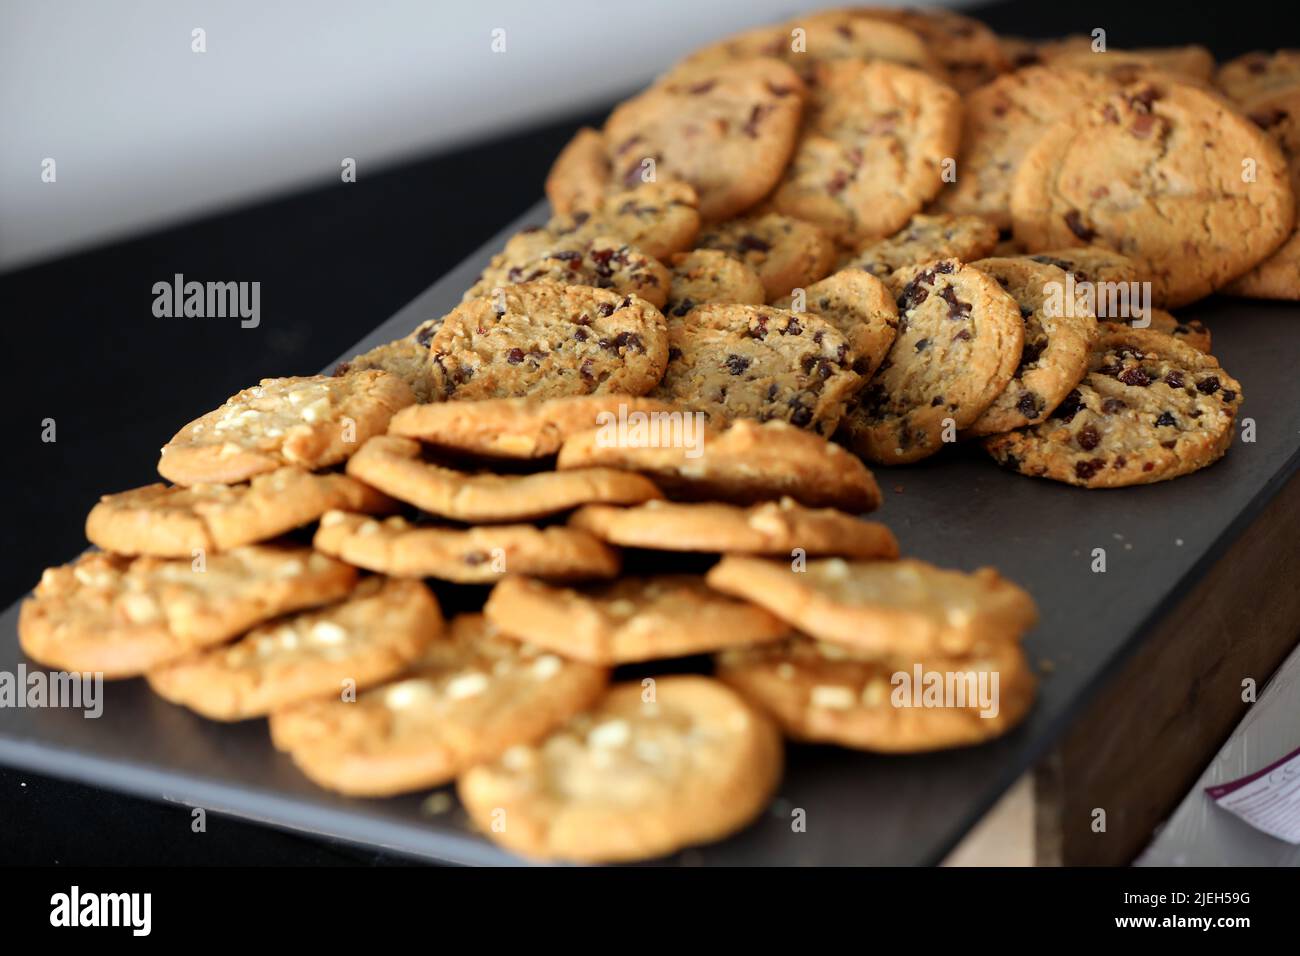 Cookies and biscuits pictured on a plate at a conference centre in London, UK. Stock Photo